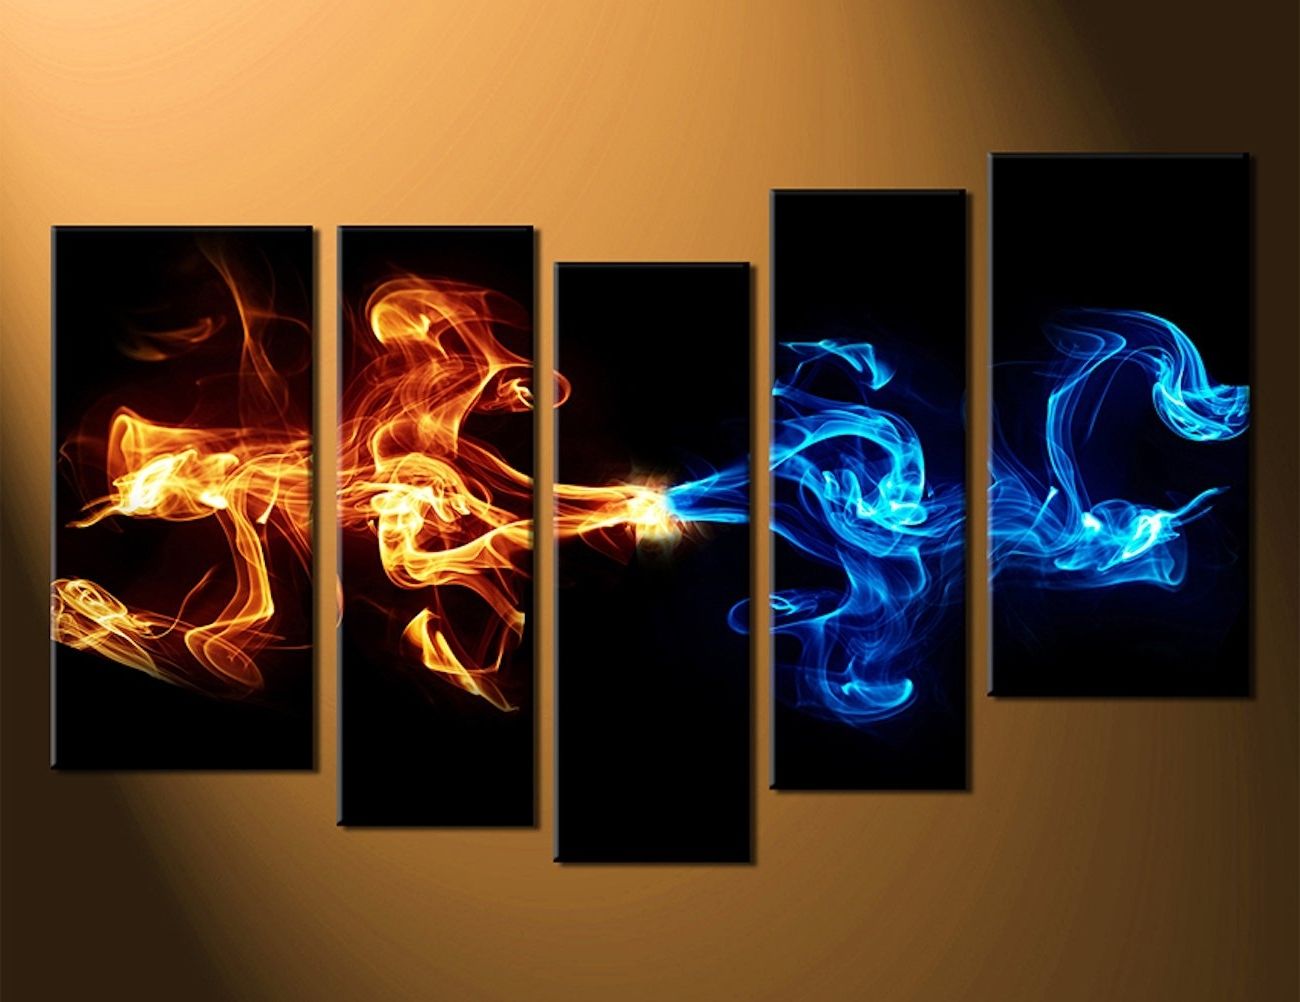 Widely Used Abstract 5 Piece Smoke Canvas Wall Art » Gadget Flow With Regard To Five Piece Canvas Wall Art (View 2 of 20)